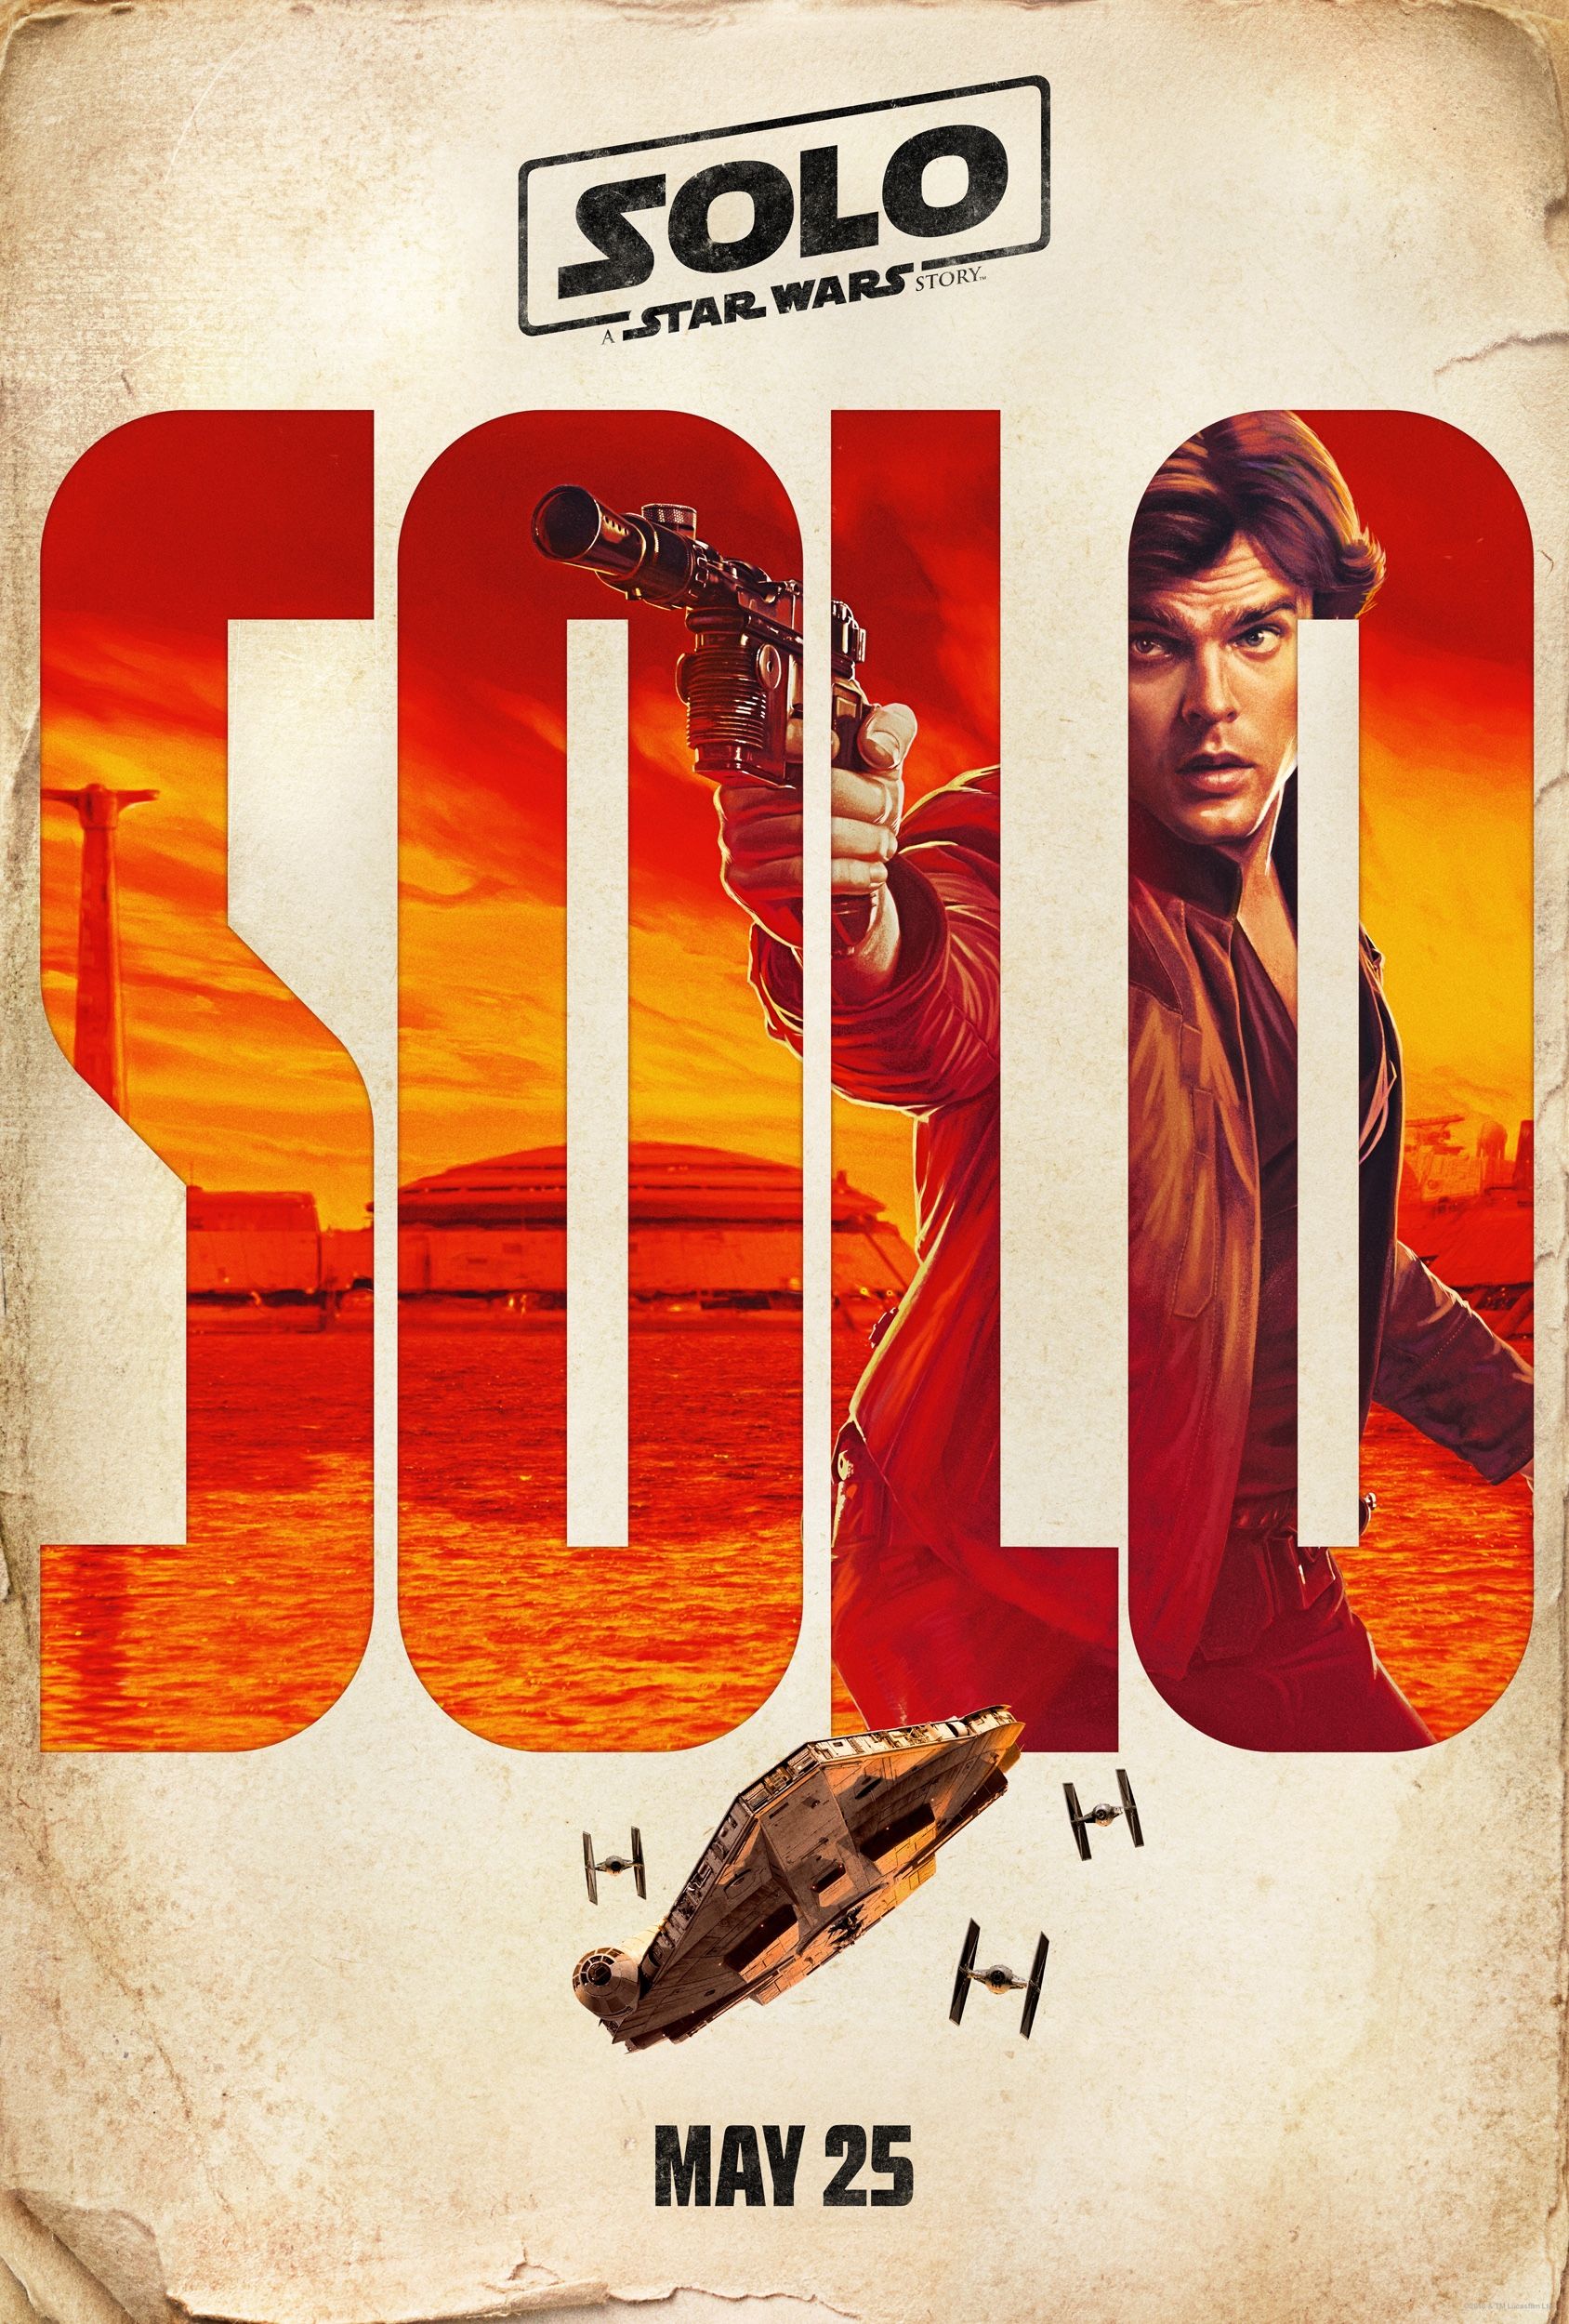 Solo Star Wars Story Han Character Poster